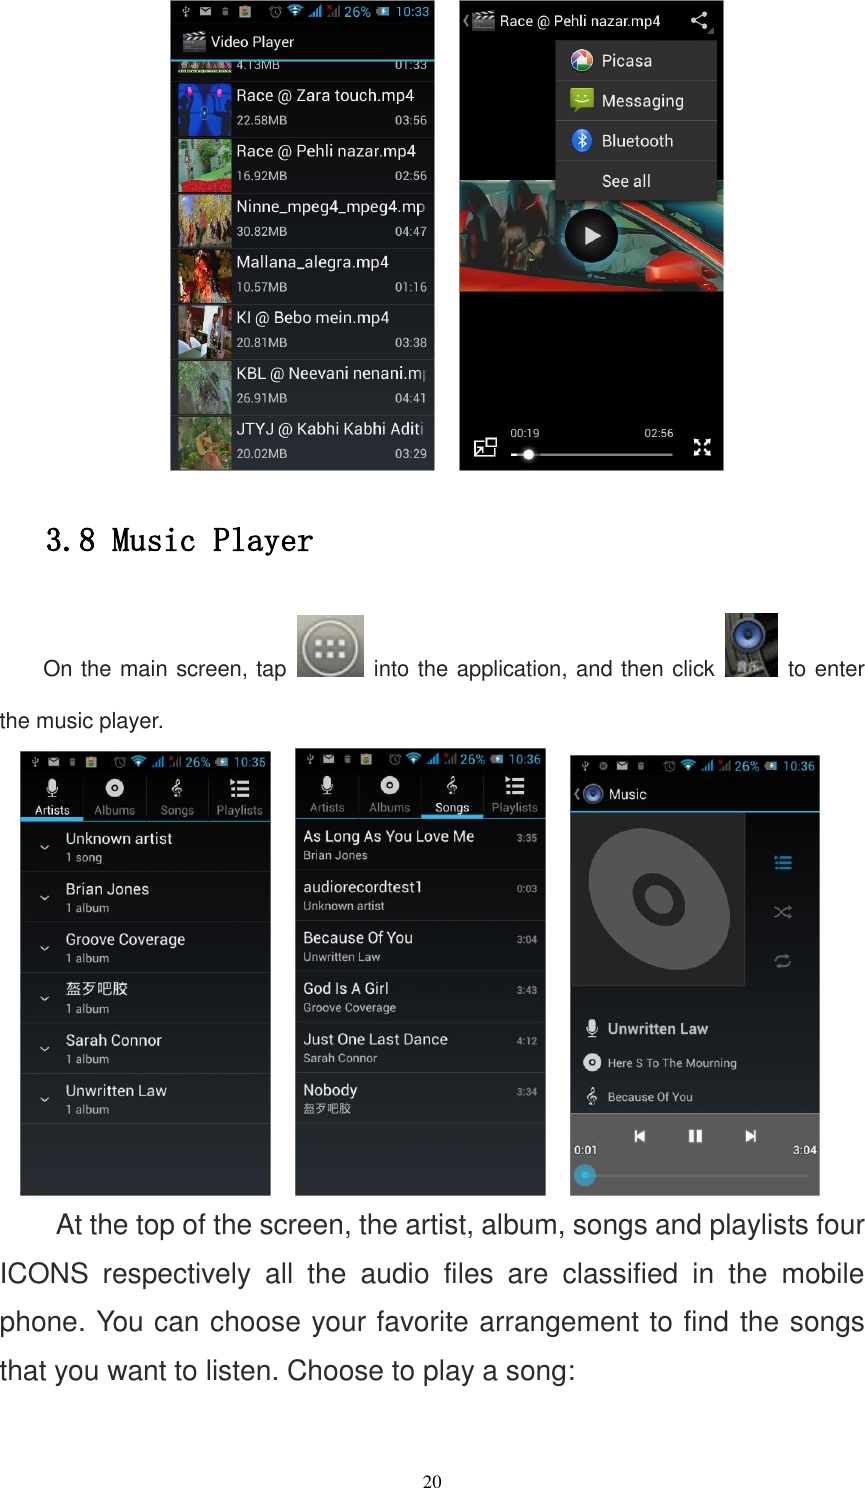   20       3.8 Music Player On the main screen, tap    into the application, and then click    to enter the music player.        At the top of the screen, the artist, album, songs and playlists four ICONS  respectively  all  the  audio  files  are  classified  in  the  mobile phone. You can choose your favorite arrangement to find the songs that you want to listen. Choose to play a song: 